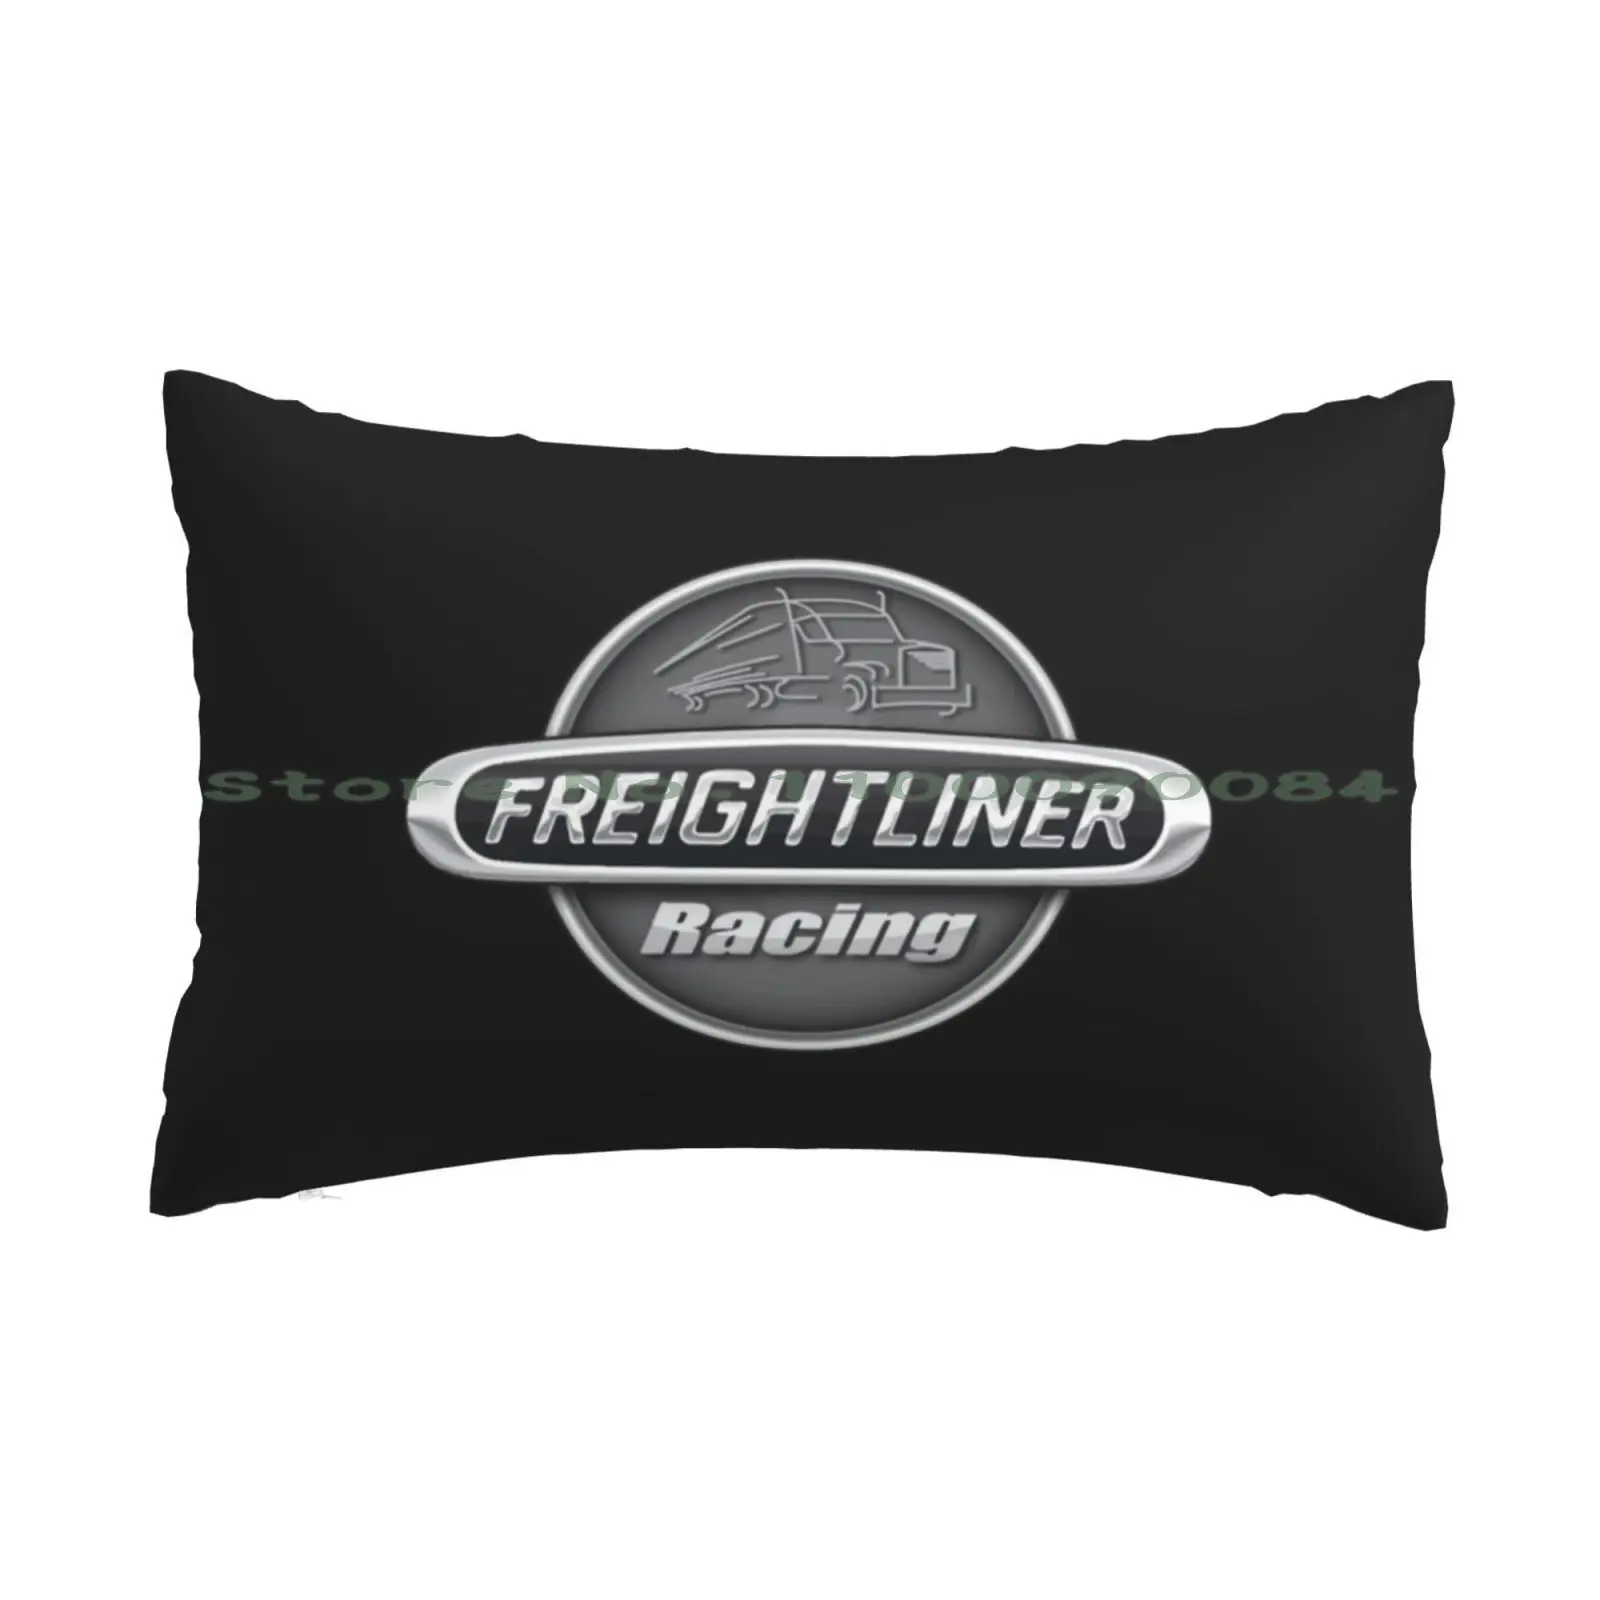 

Freightliner Trucks Pillow Case 20x30 50*75 Sofa Bedroom Sam Winchester Dean Winchester License Plate Number Plate Kaz2y5 67